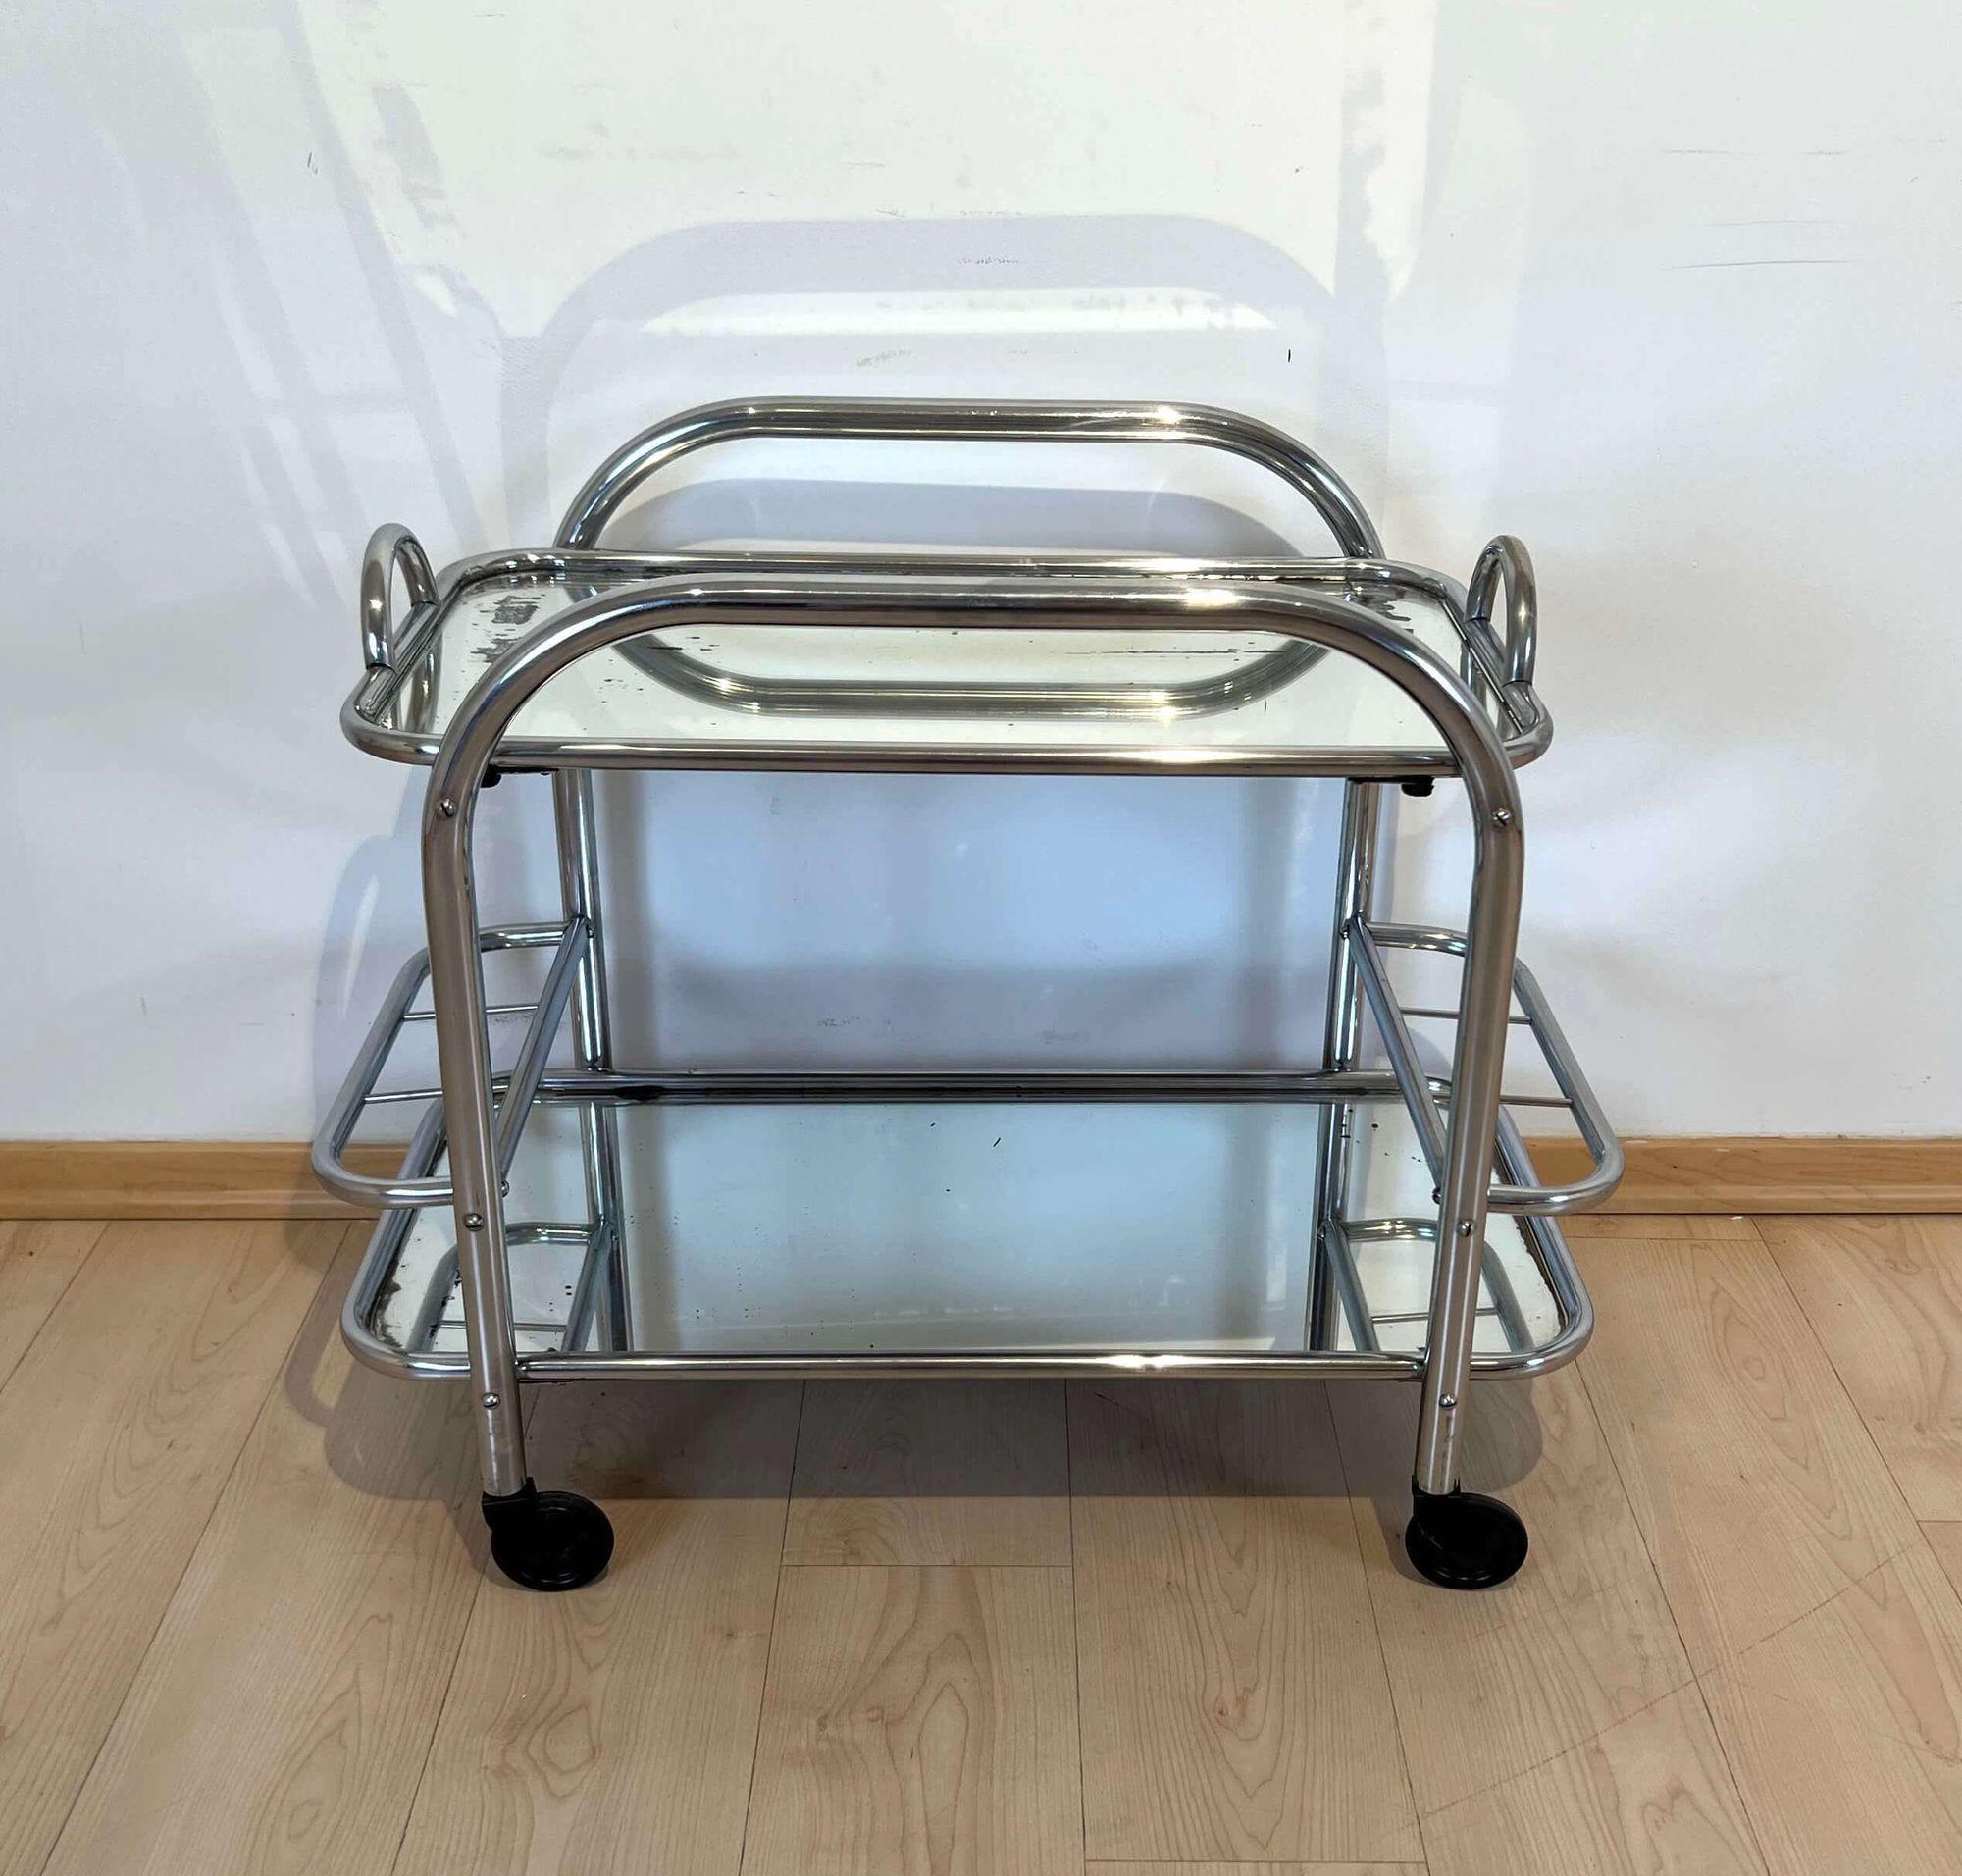 Art Deco Bar Cart or Serving Trolley, Chromed Steeltubes, France circa 1925

Design: Robert Mallet-Stevens (Paris, 1886 - 1945)

Chromed thick steel tube. Original old mirrored glass. Upper tray can be removed for serving. Mobile on 4 casters.
6